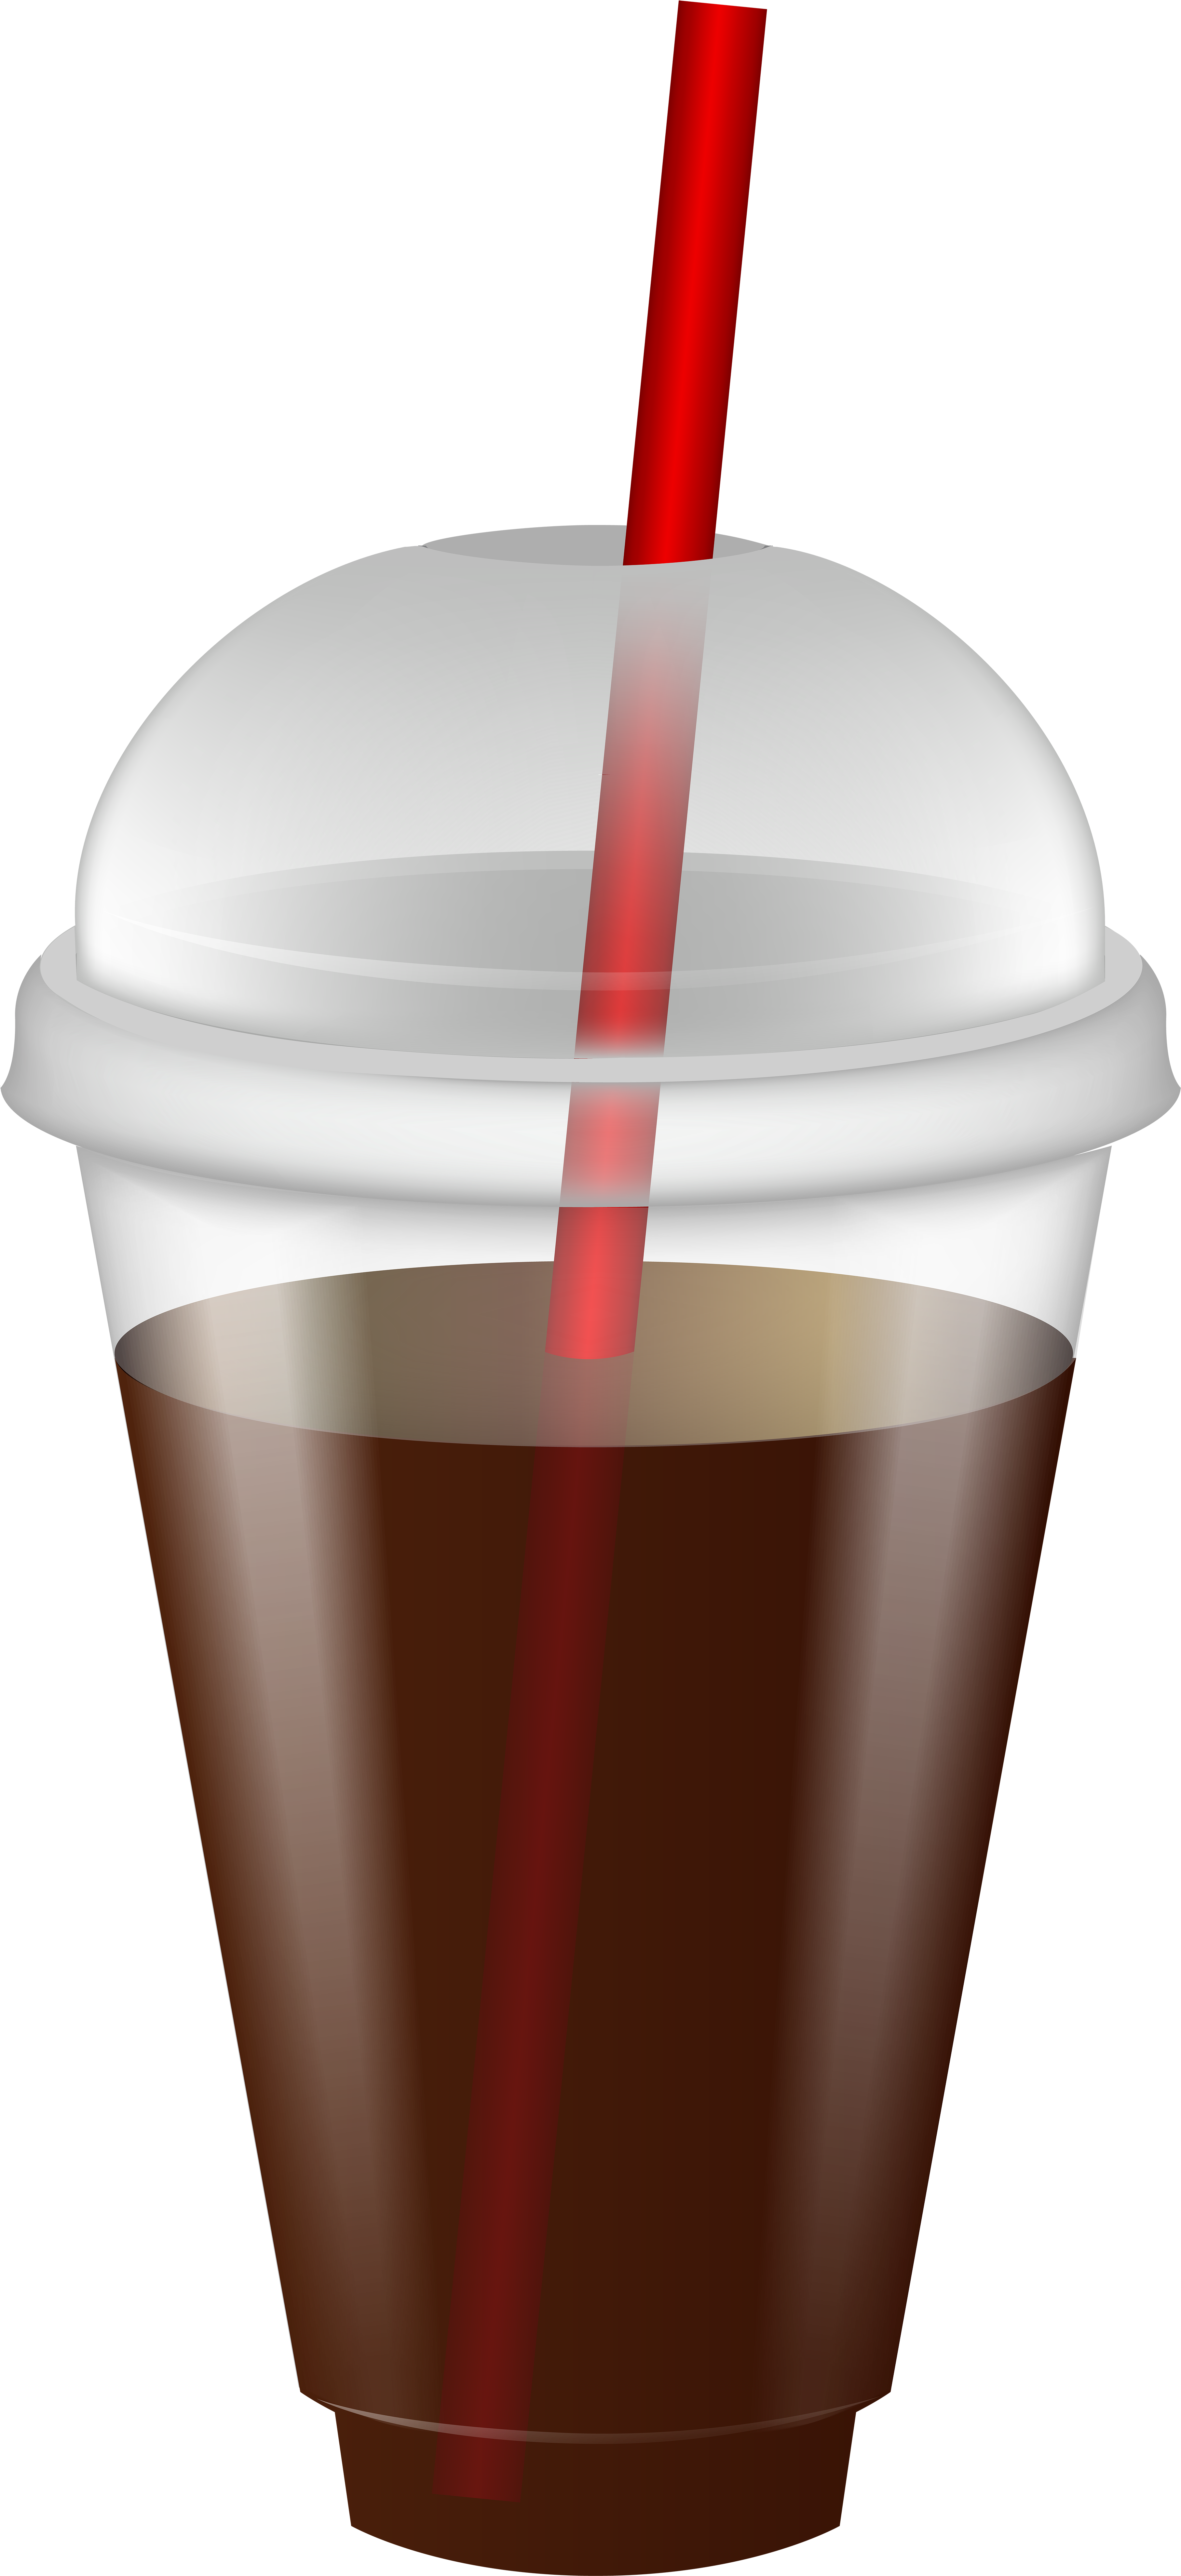 Drink Cup With Straw Png Transparent Clip Art Image G - vrogue.co